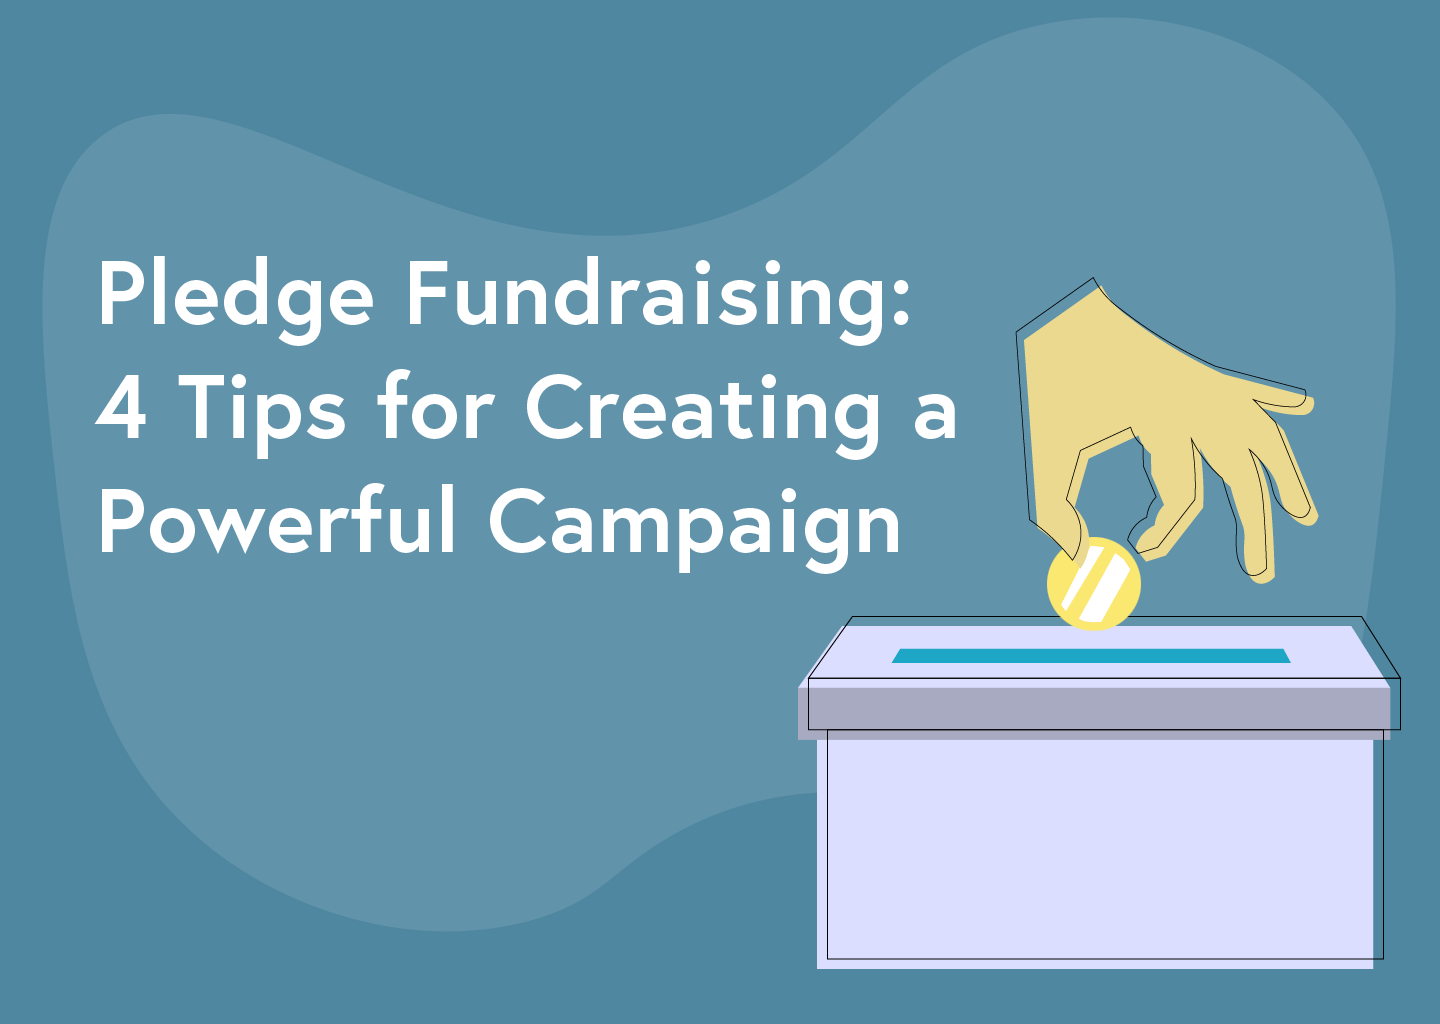 Pledge Fundraising: 4 Tips for Creating a Powerful Campaign